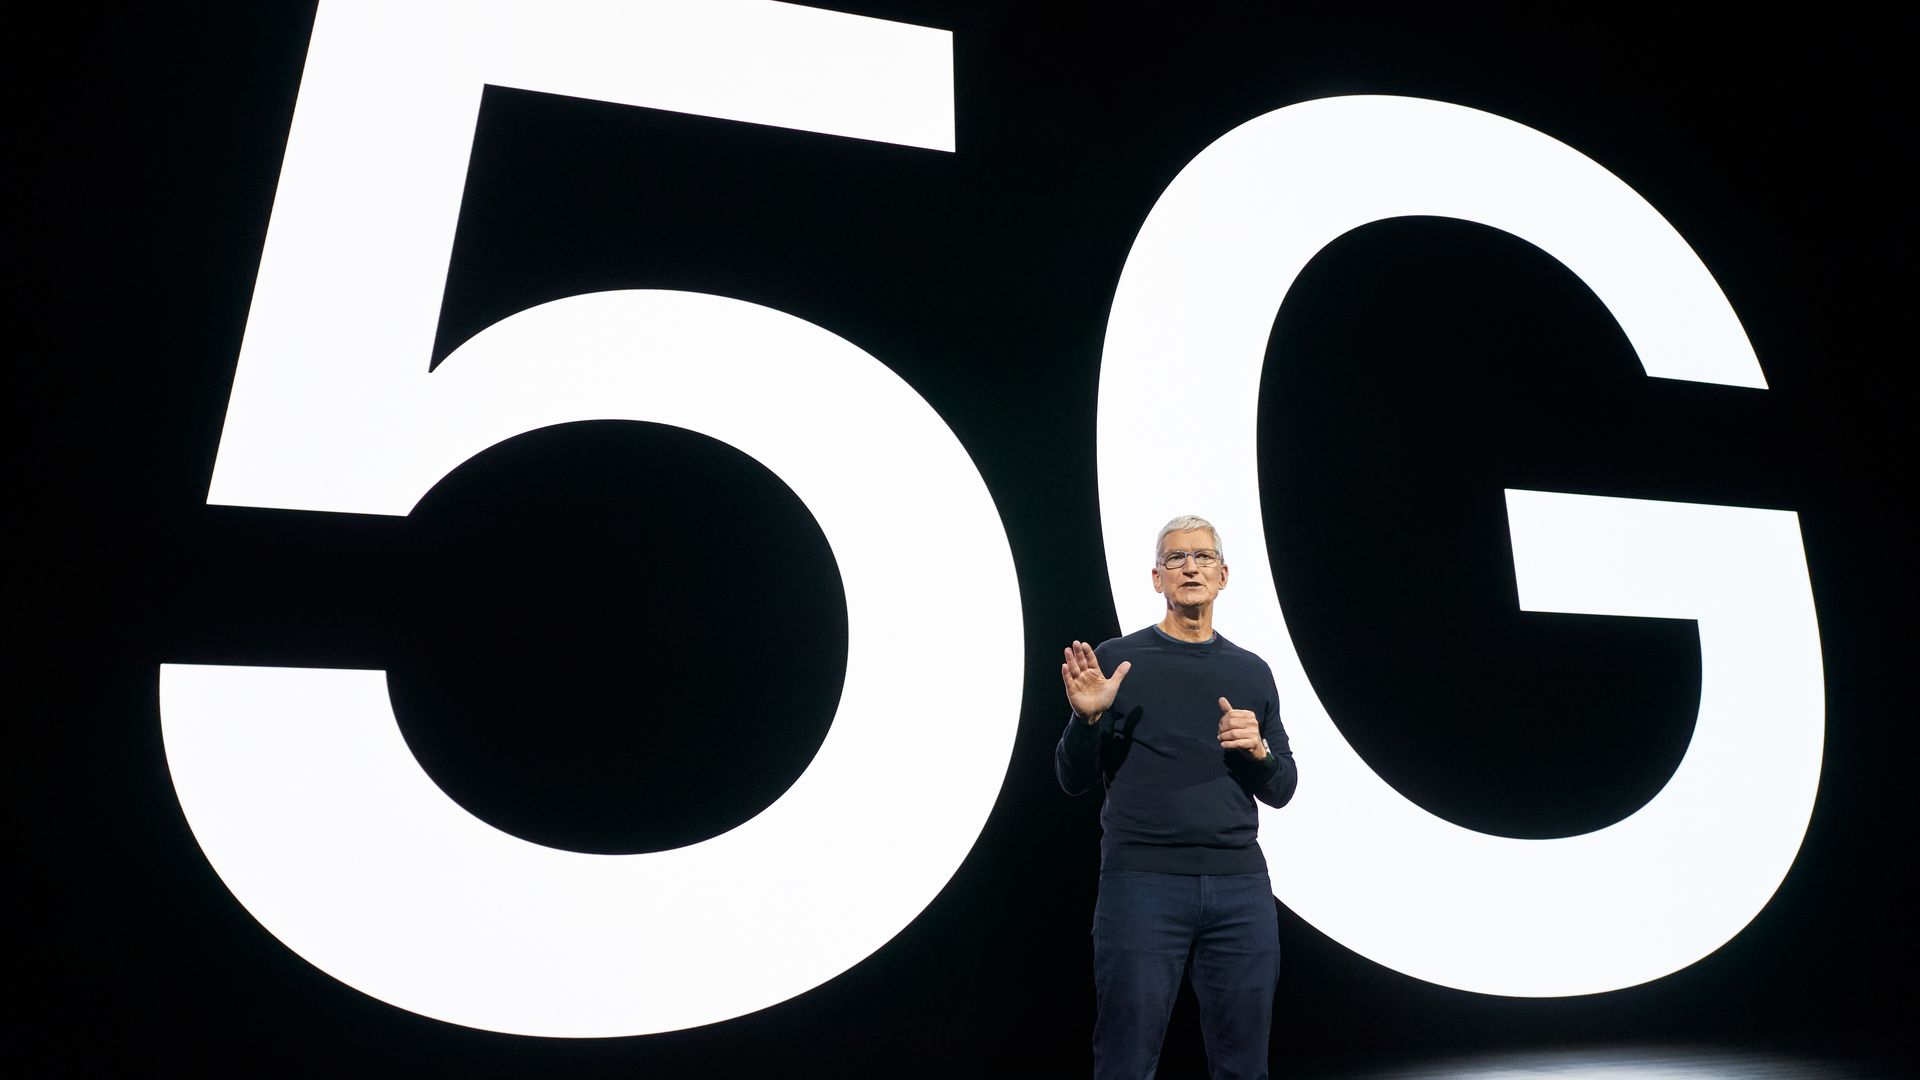 Apple CEO Tim Cook unveiling the 5G-capable iPhone 12 lineup